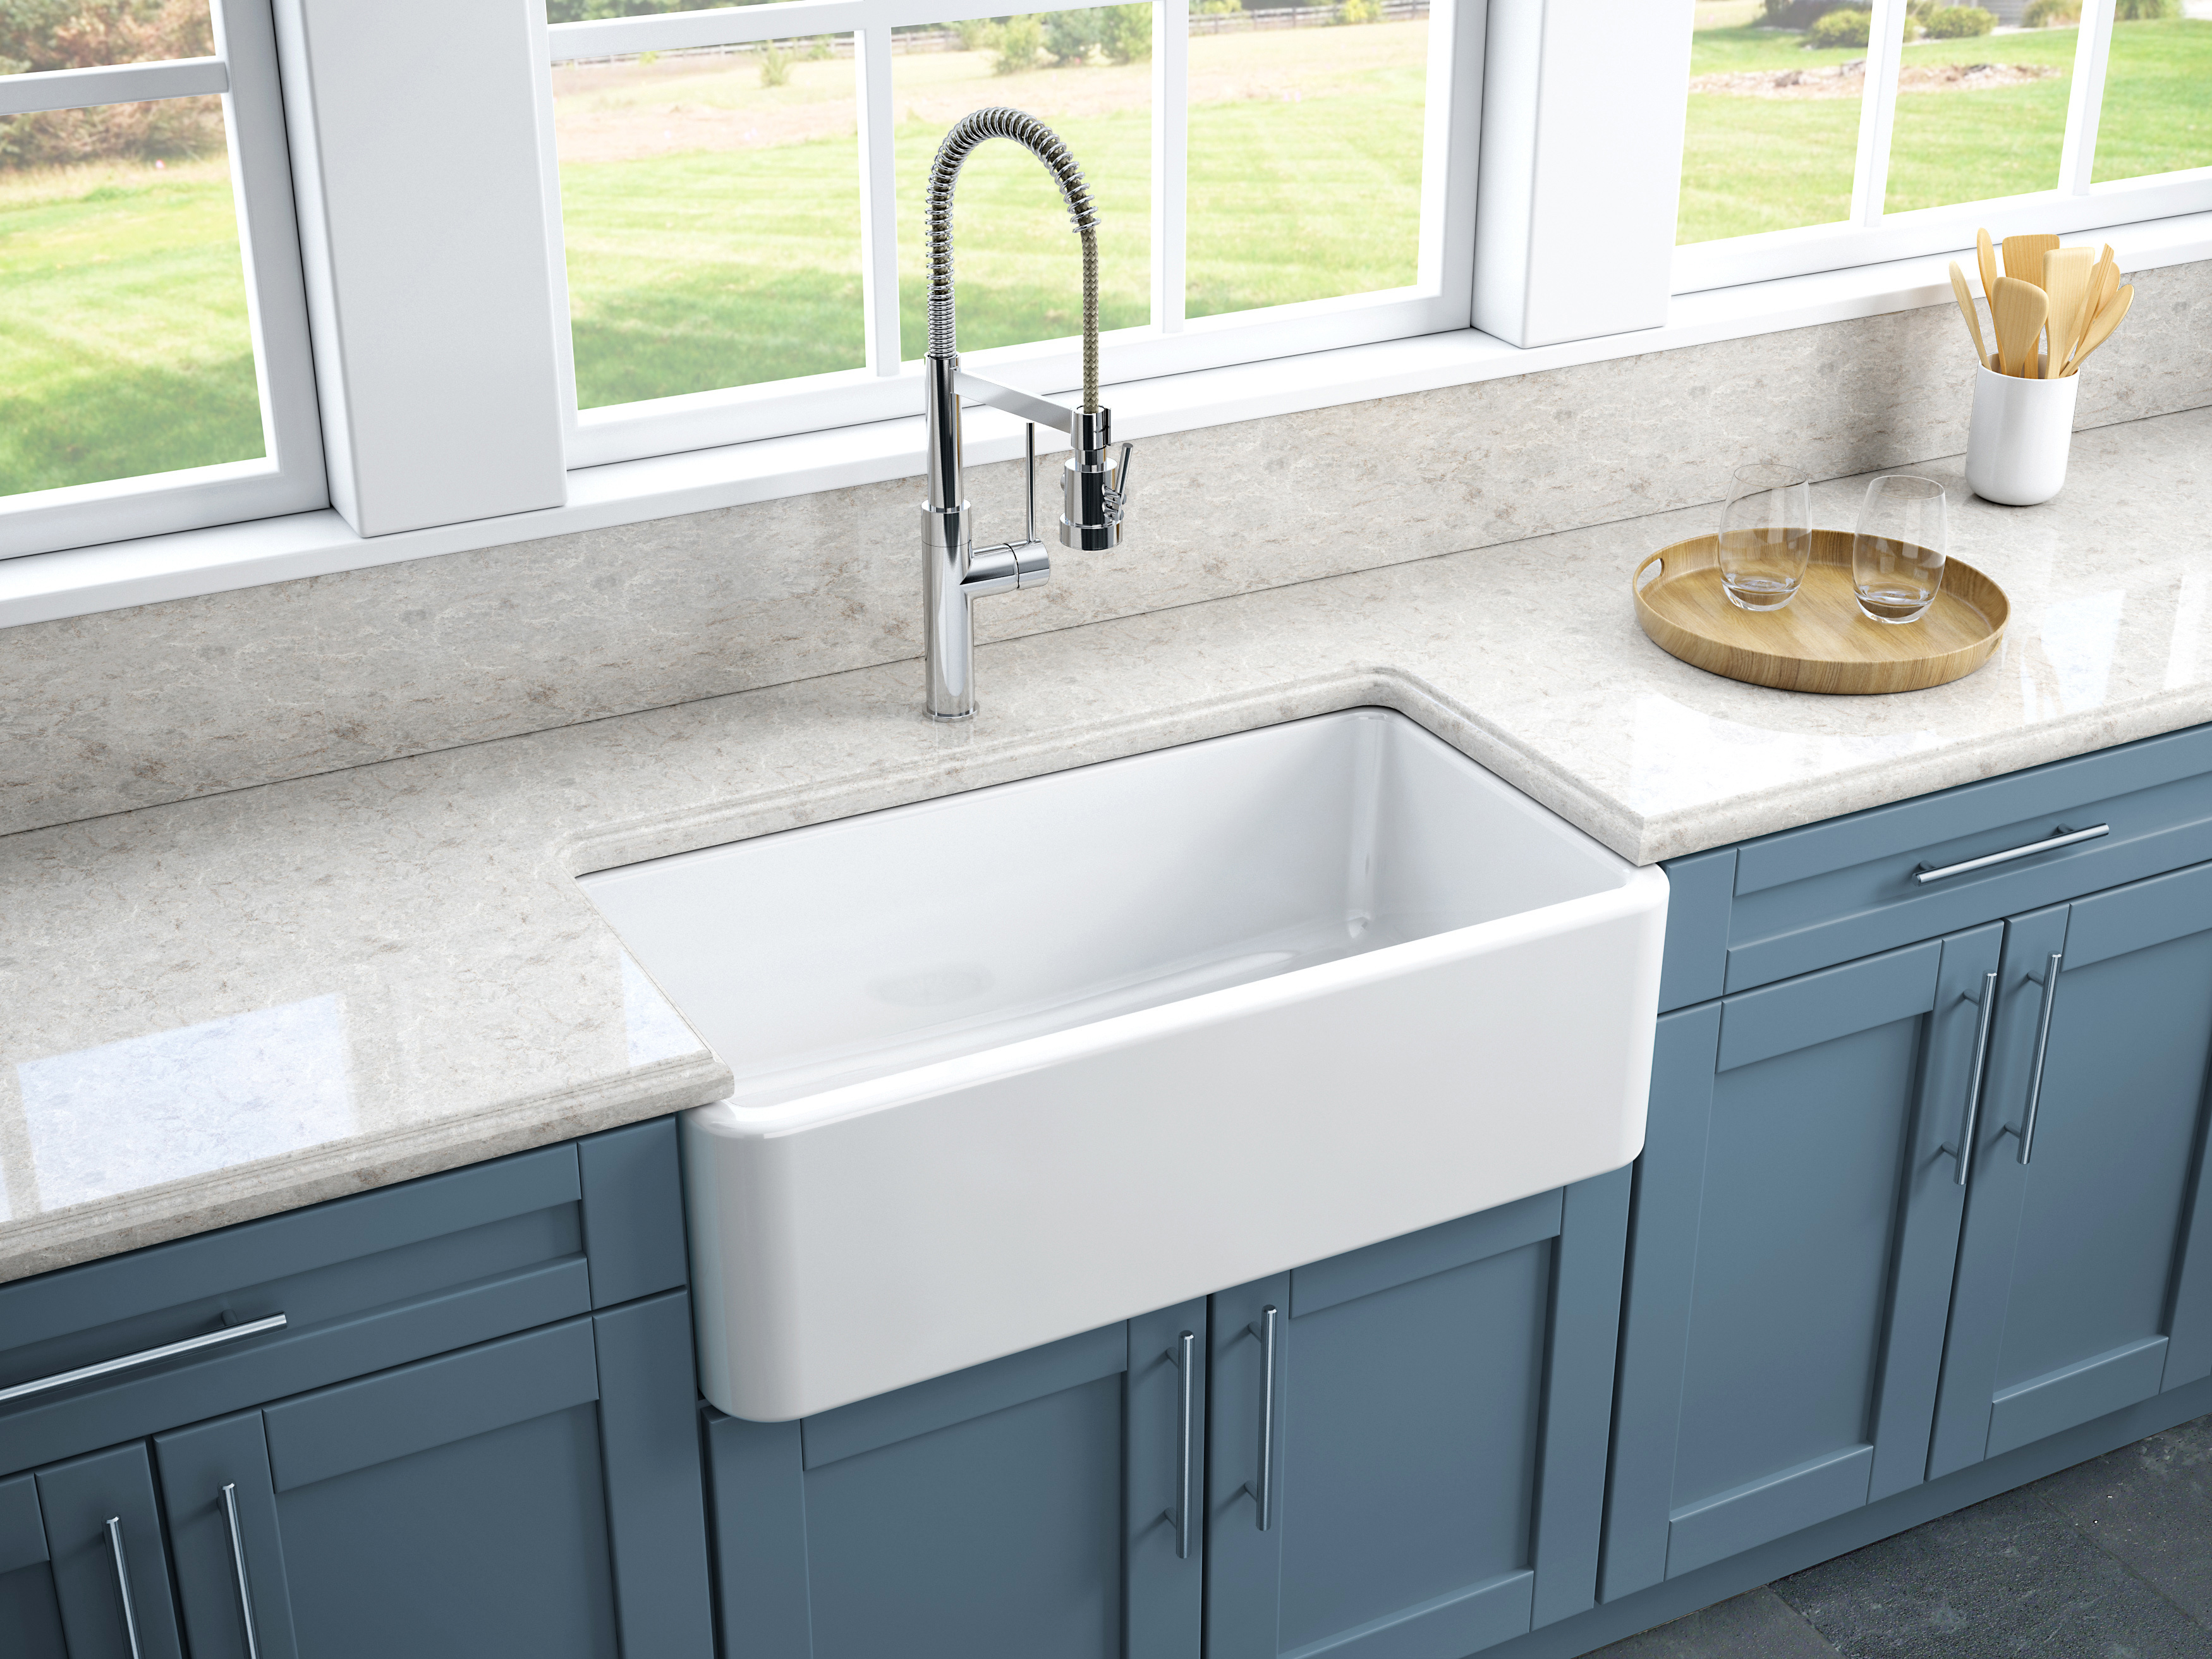 kitchen sink size for 32 inch cabinet